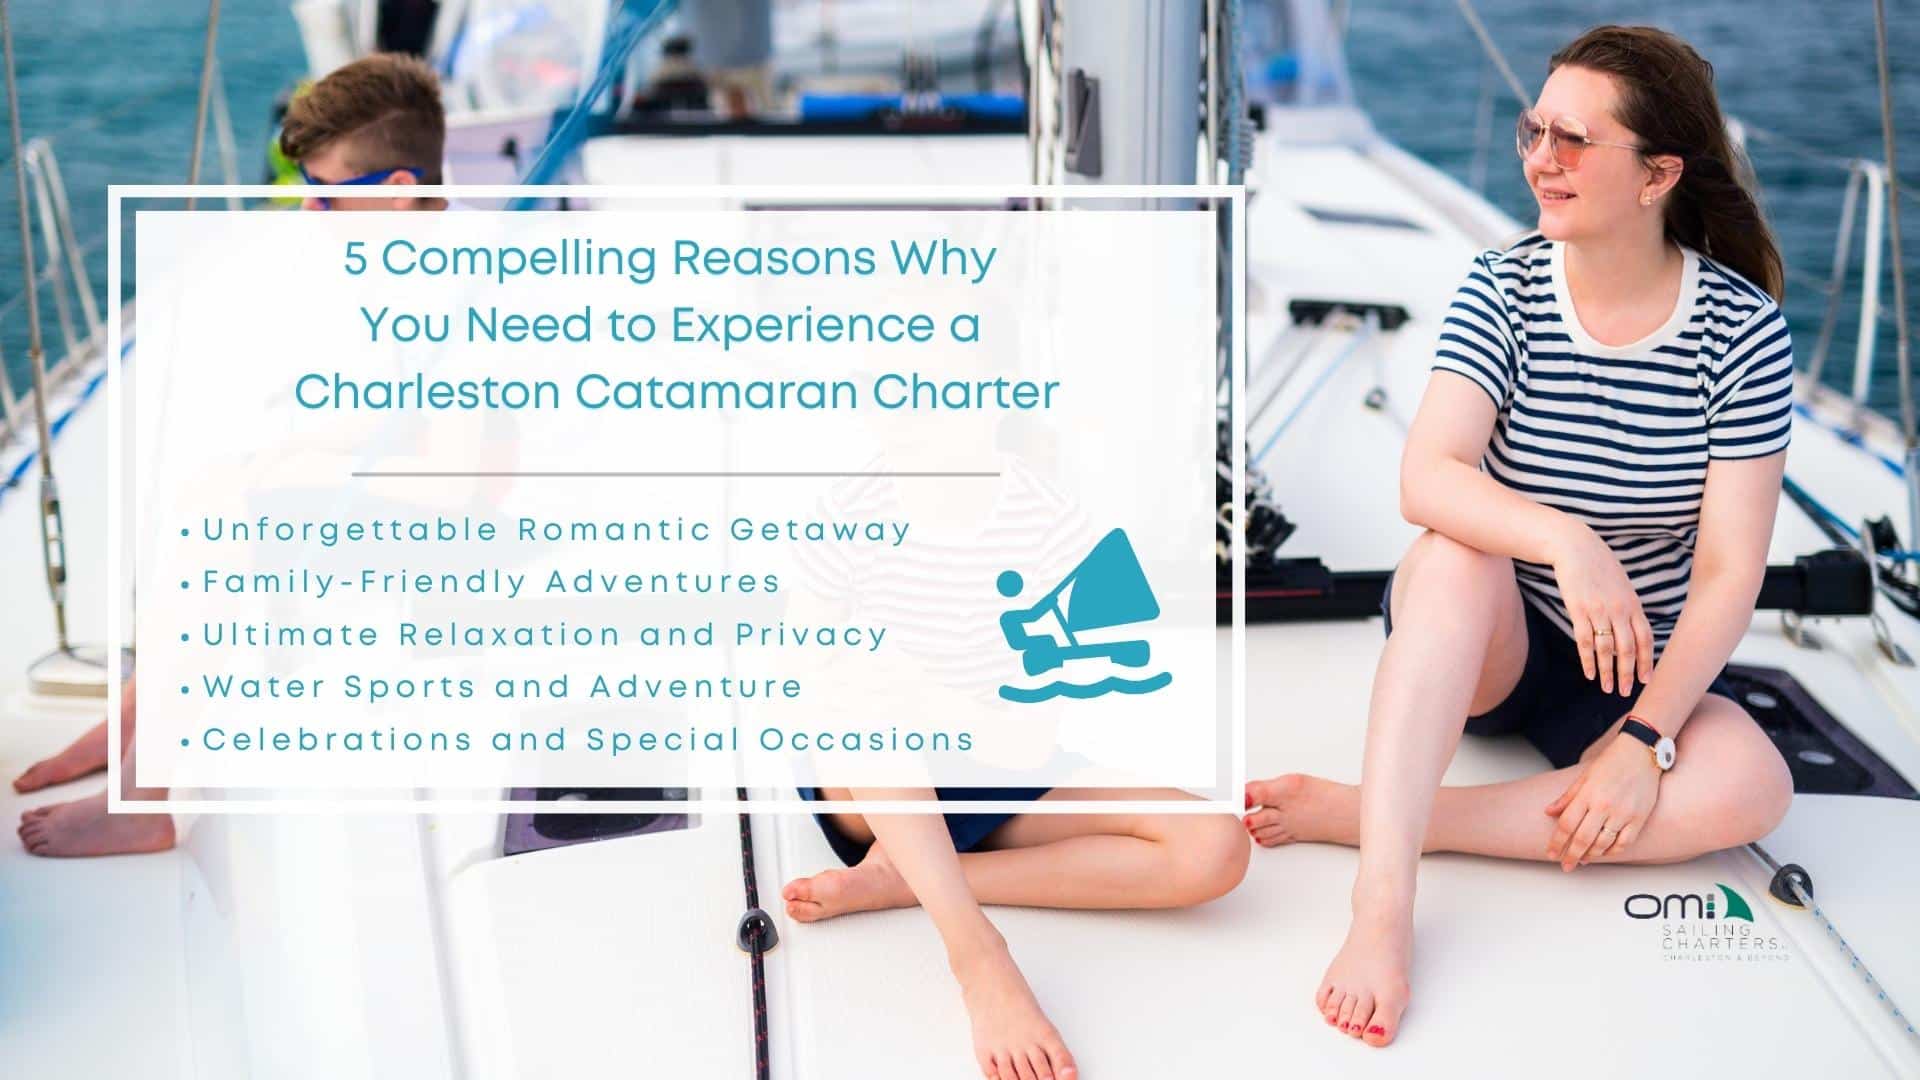 Infographic image of 5 compelling reasons why you need to experience a Charleston catamaran charter